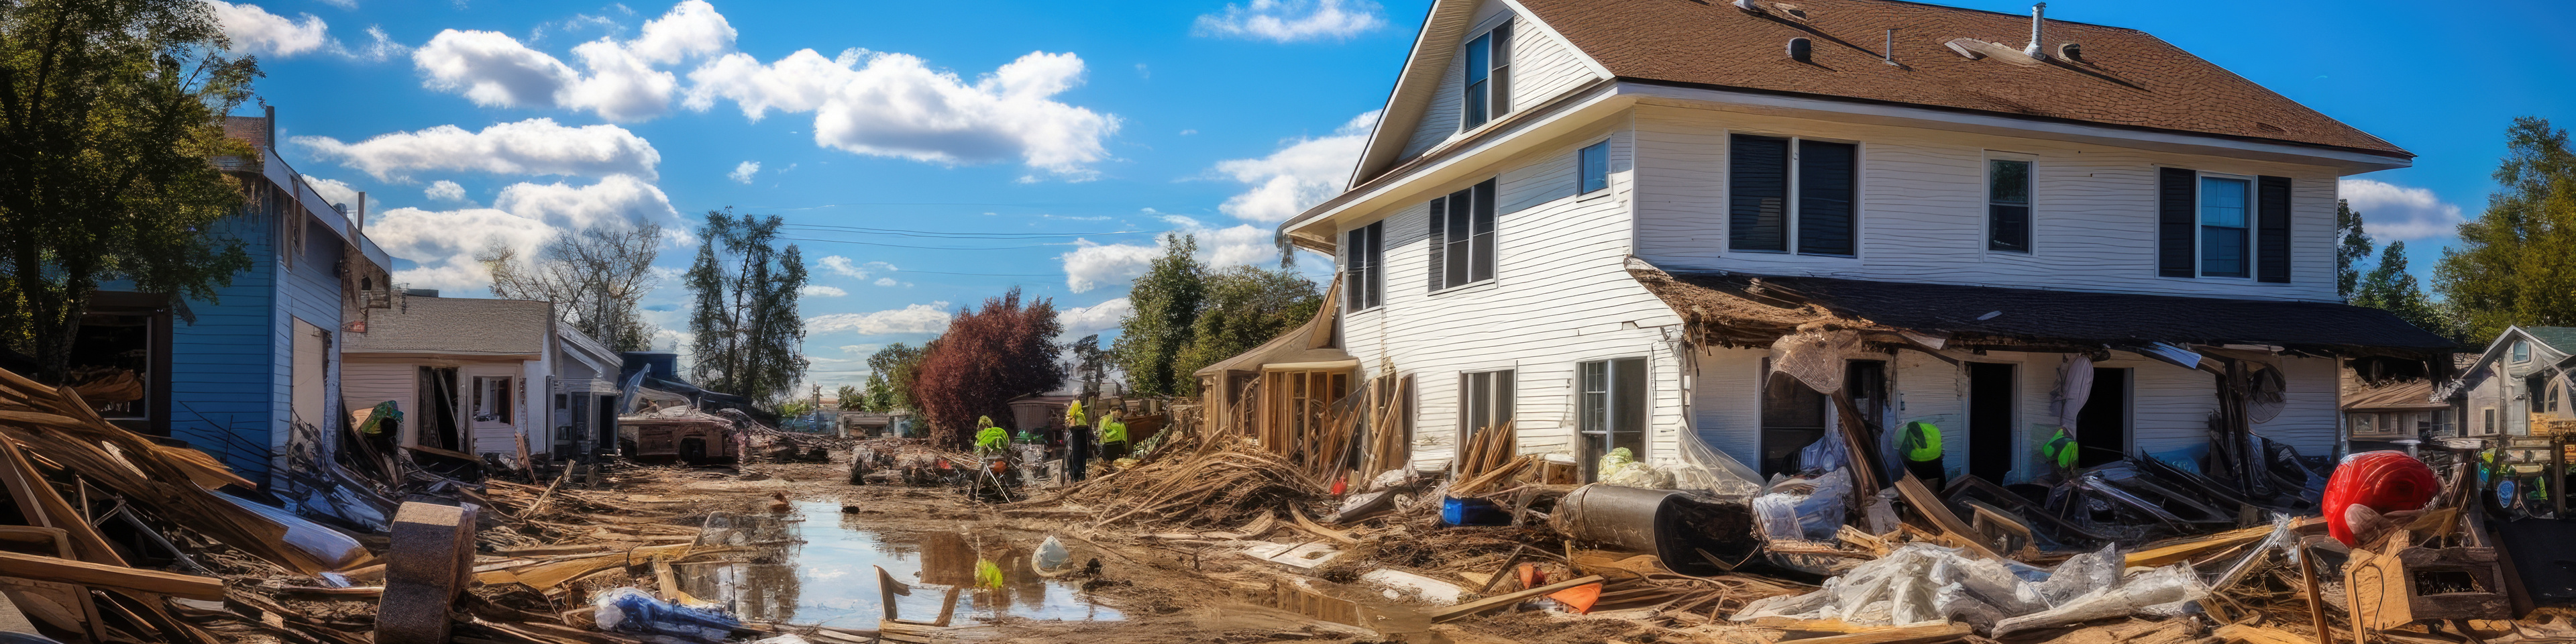 Tax relief for victims of Michigan severe storms, tornadoes, and flooding: IRA and HSA deadlines postponed